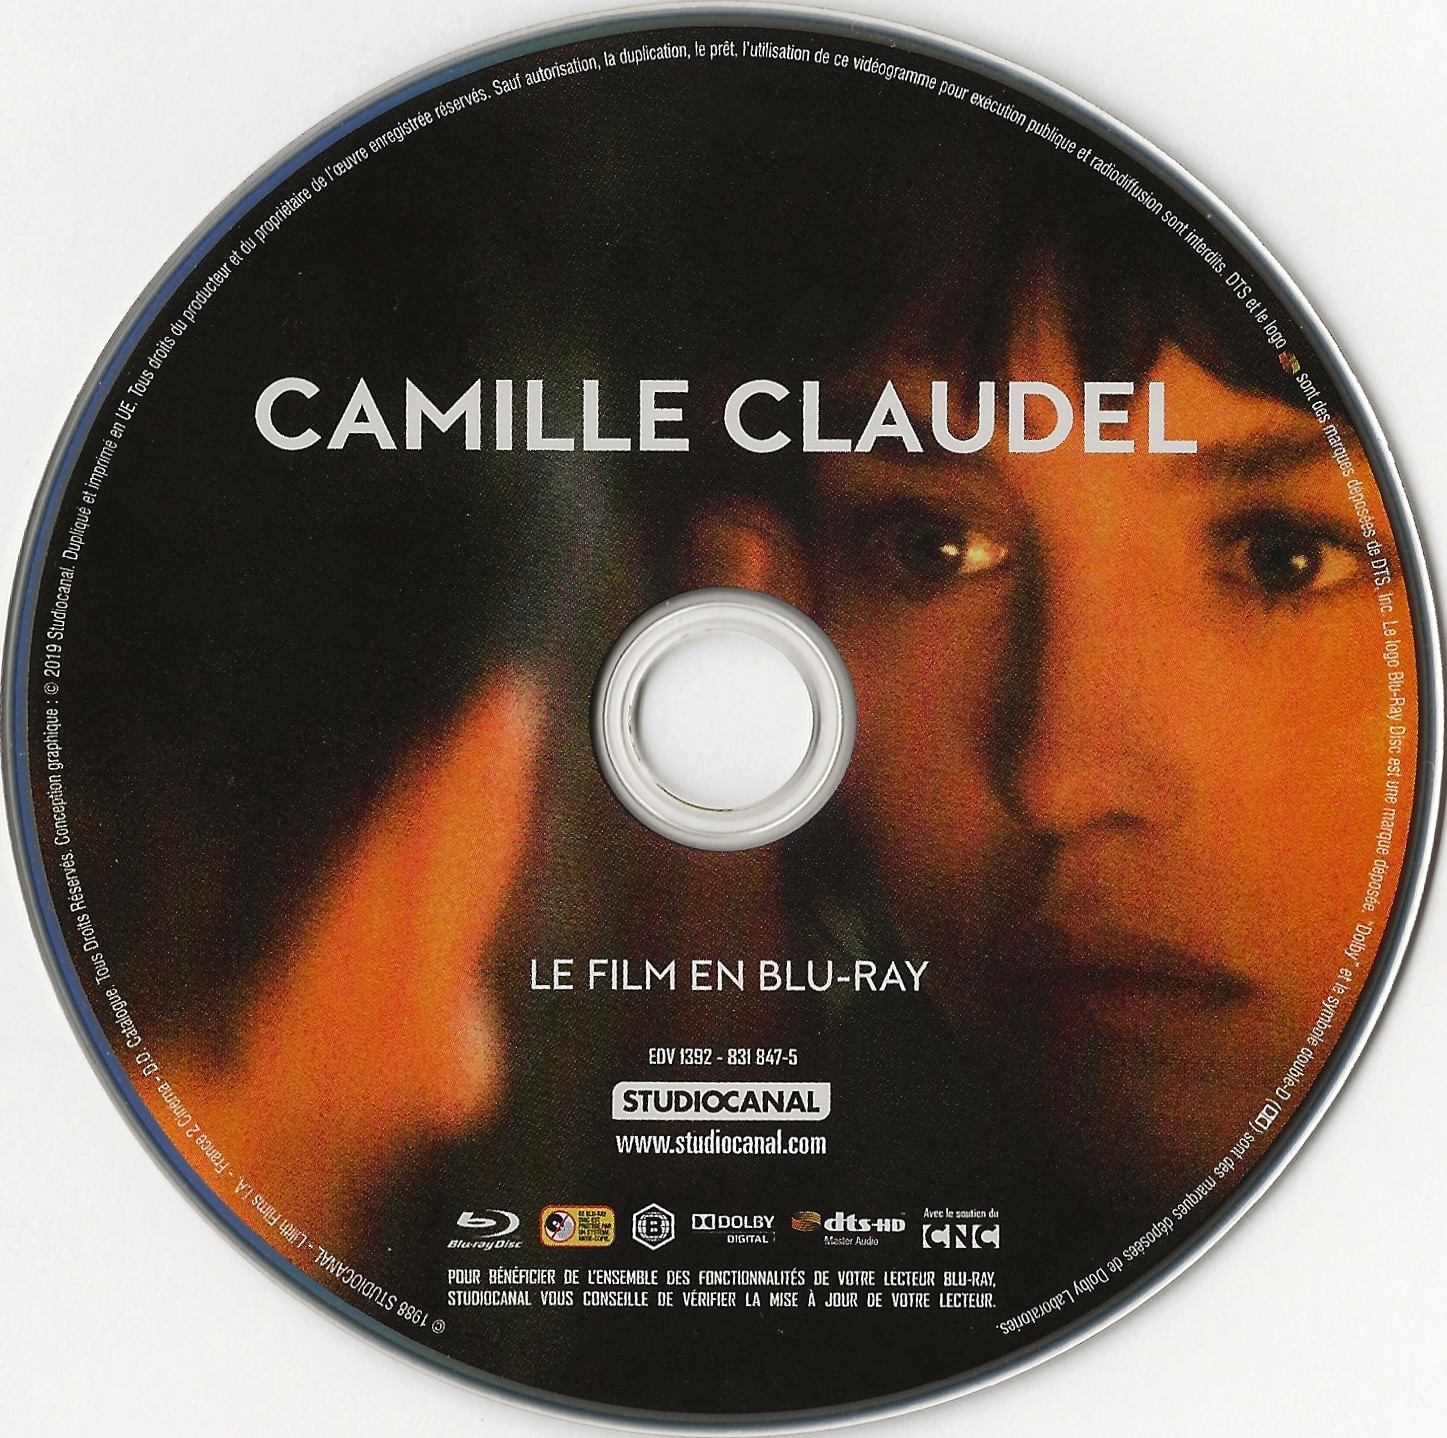 Camille Claudel (BLU-RAY)